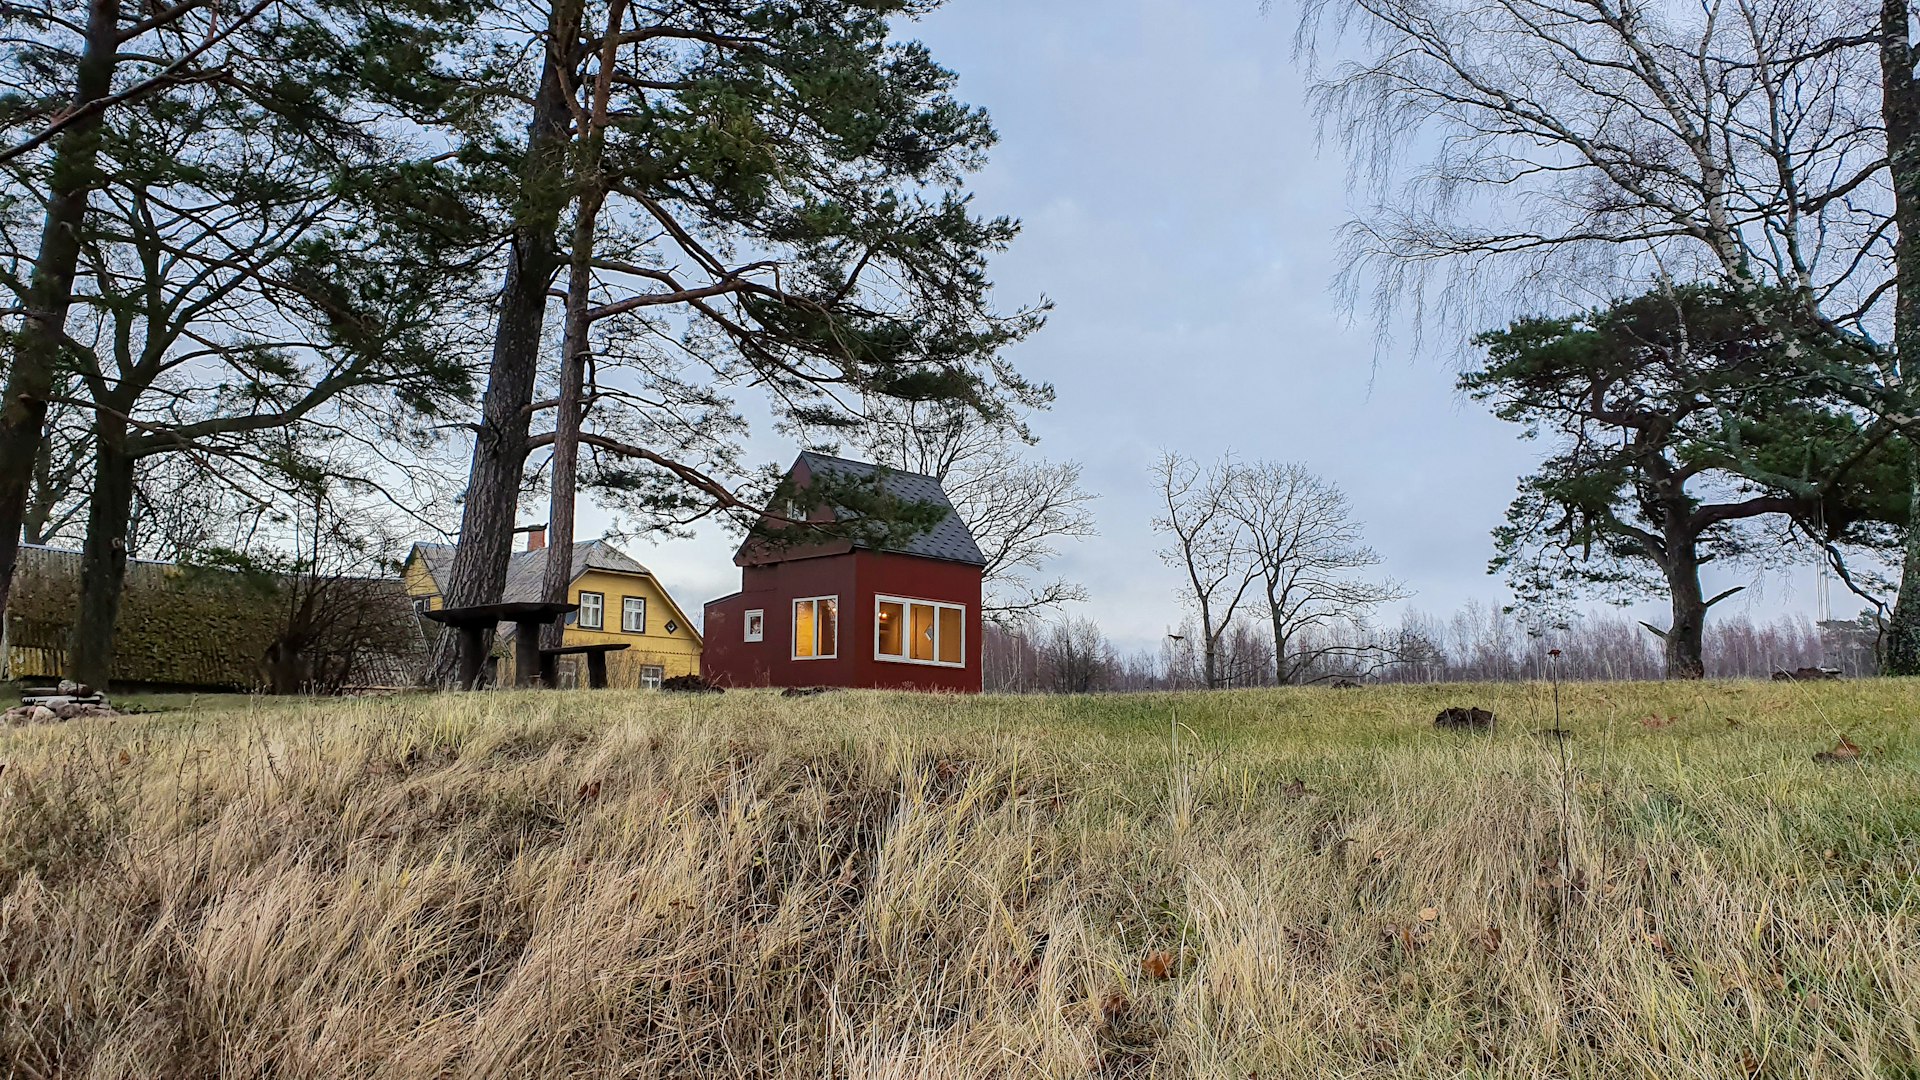 A landscape picture of the tiny house